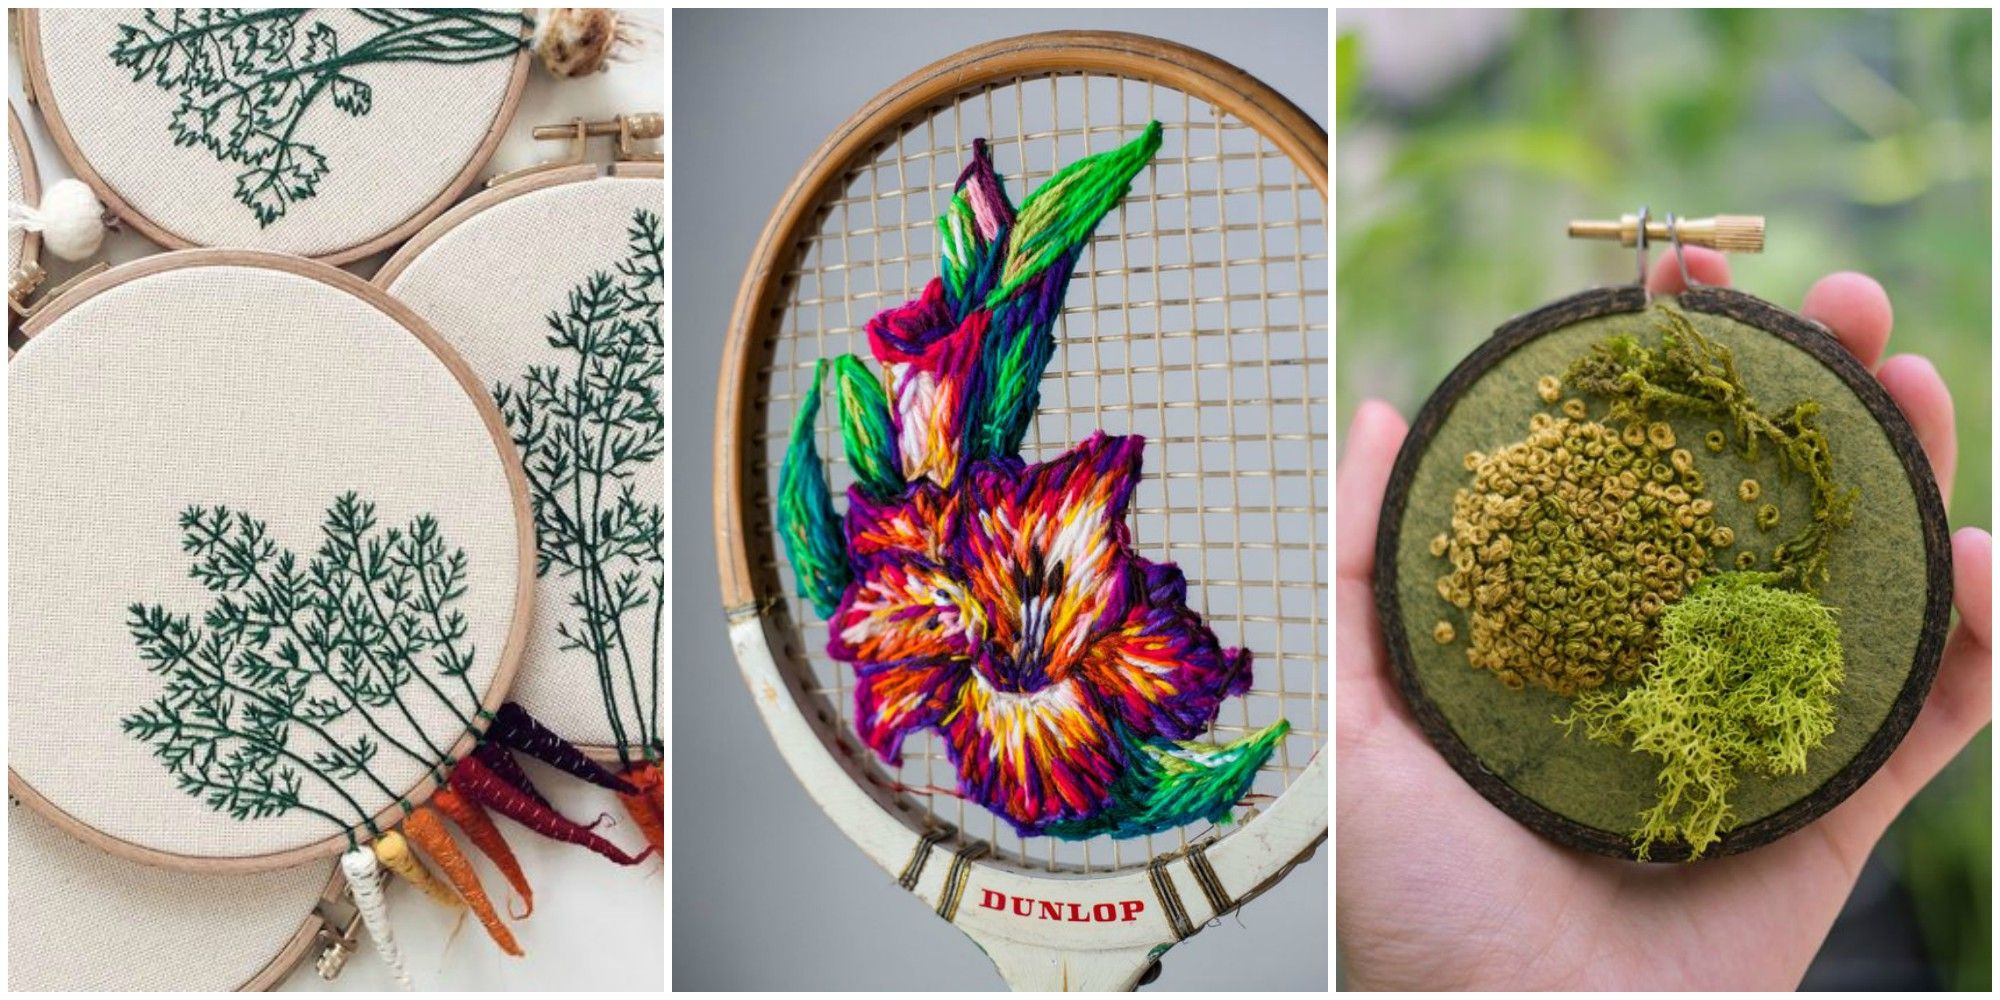 Embroidery Patterns Online 10 Stunning Embroidery Ideas Youre Going To Want To Try This Spring